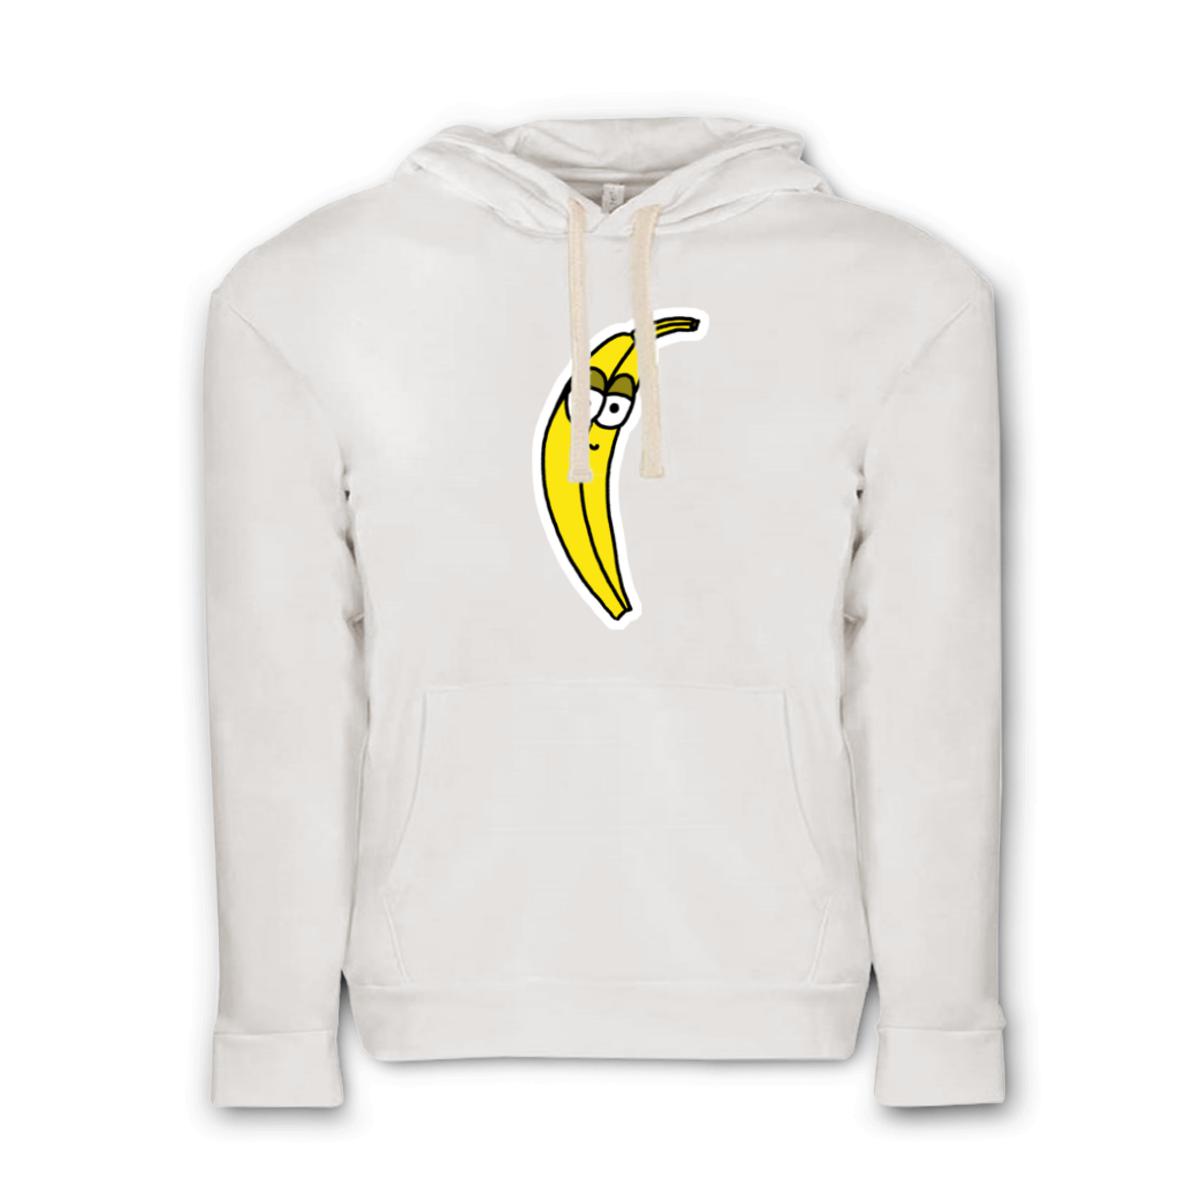 Plantain Unisex Pullover Hoodie Small white